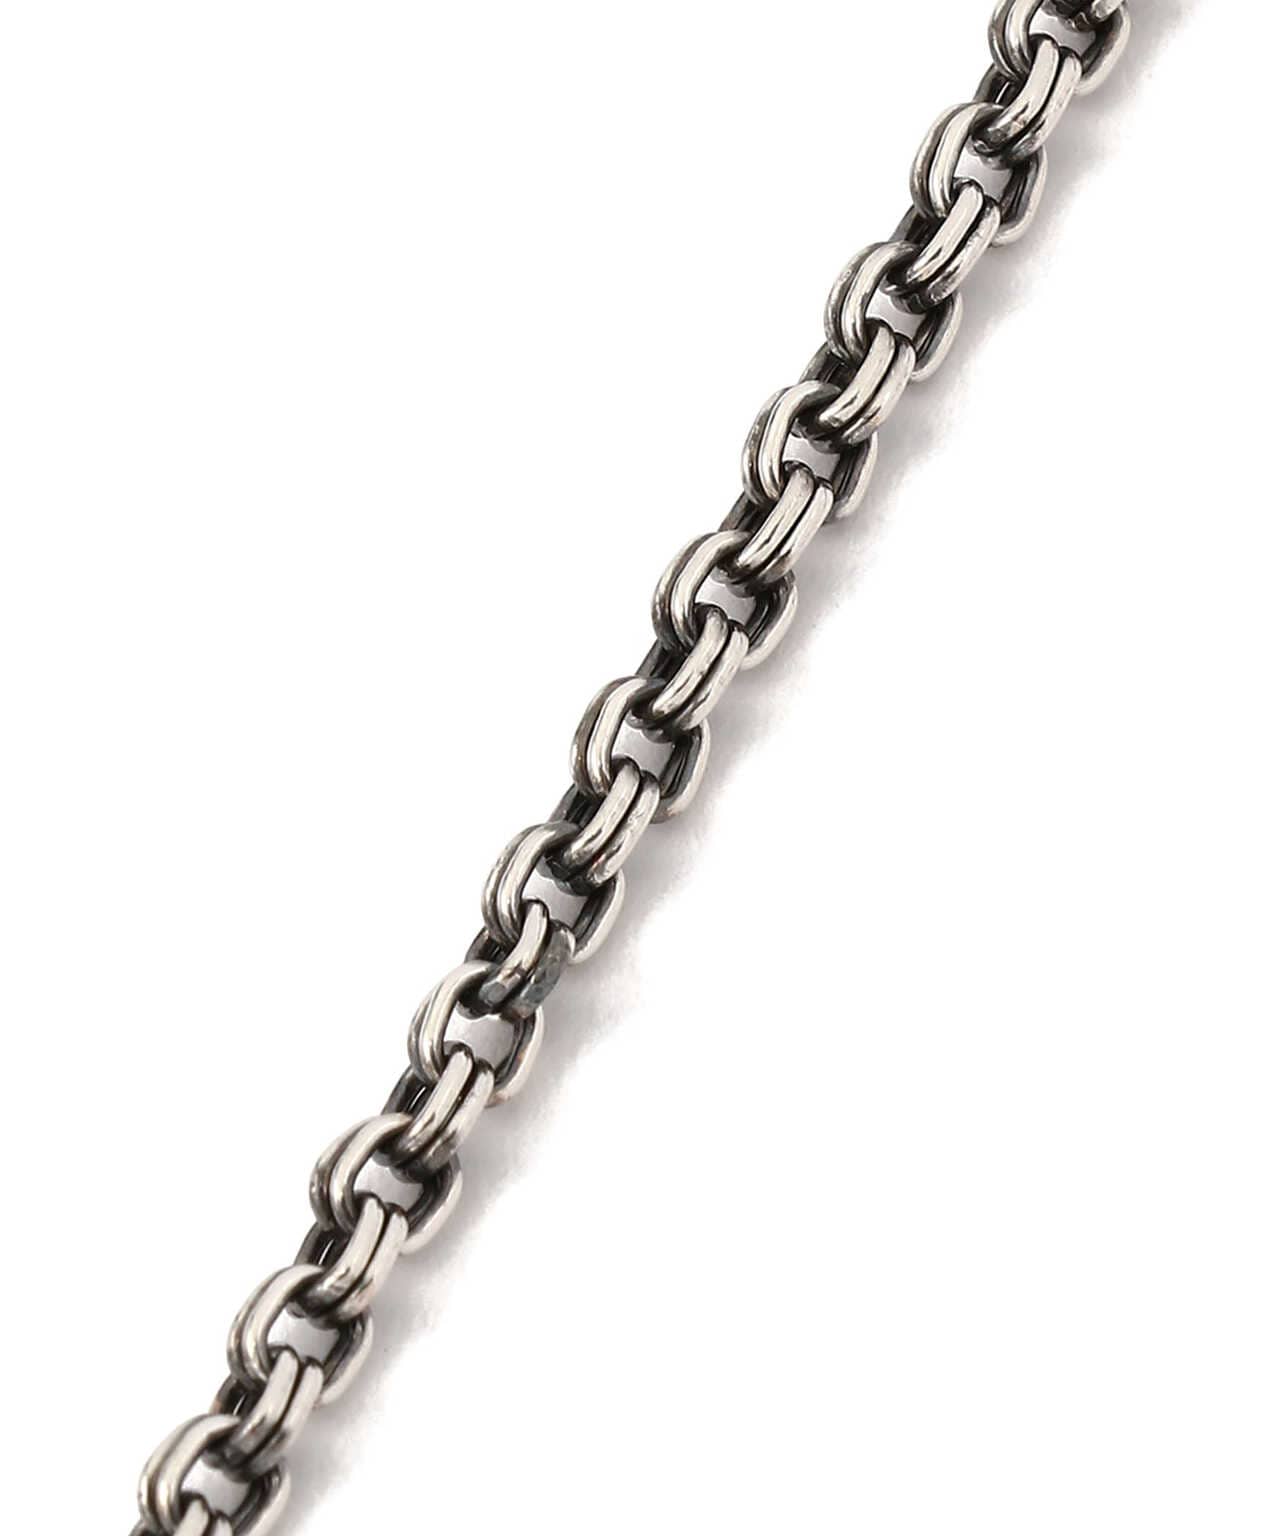 meian/メイアン/STERLING SILVER DOUBLE LINK CHAIN NECKLACE/ダブル